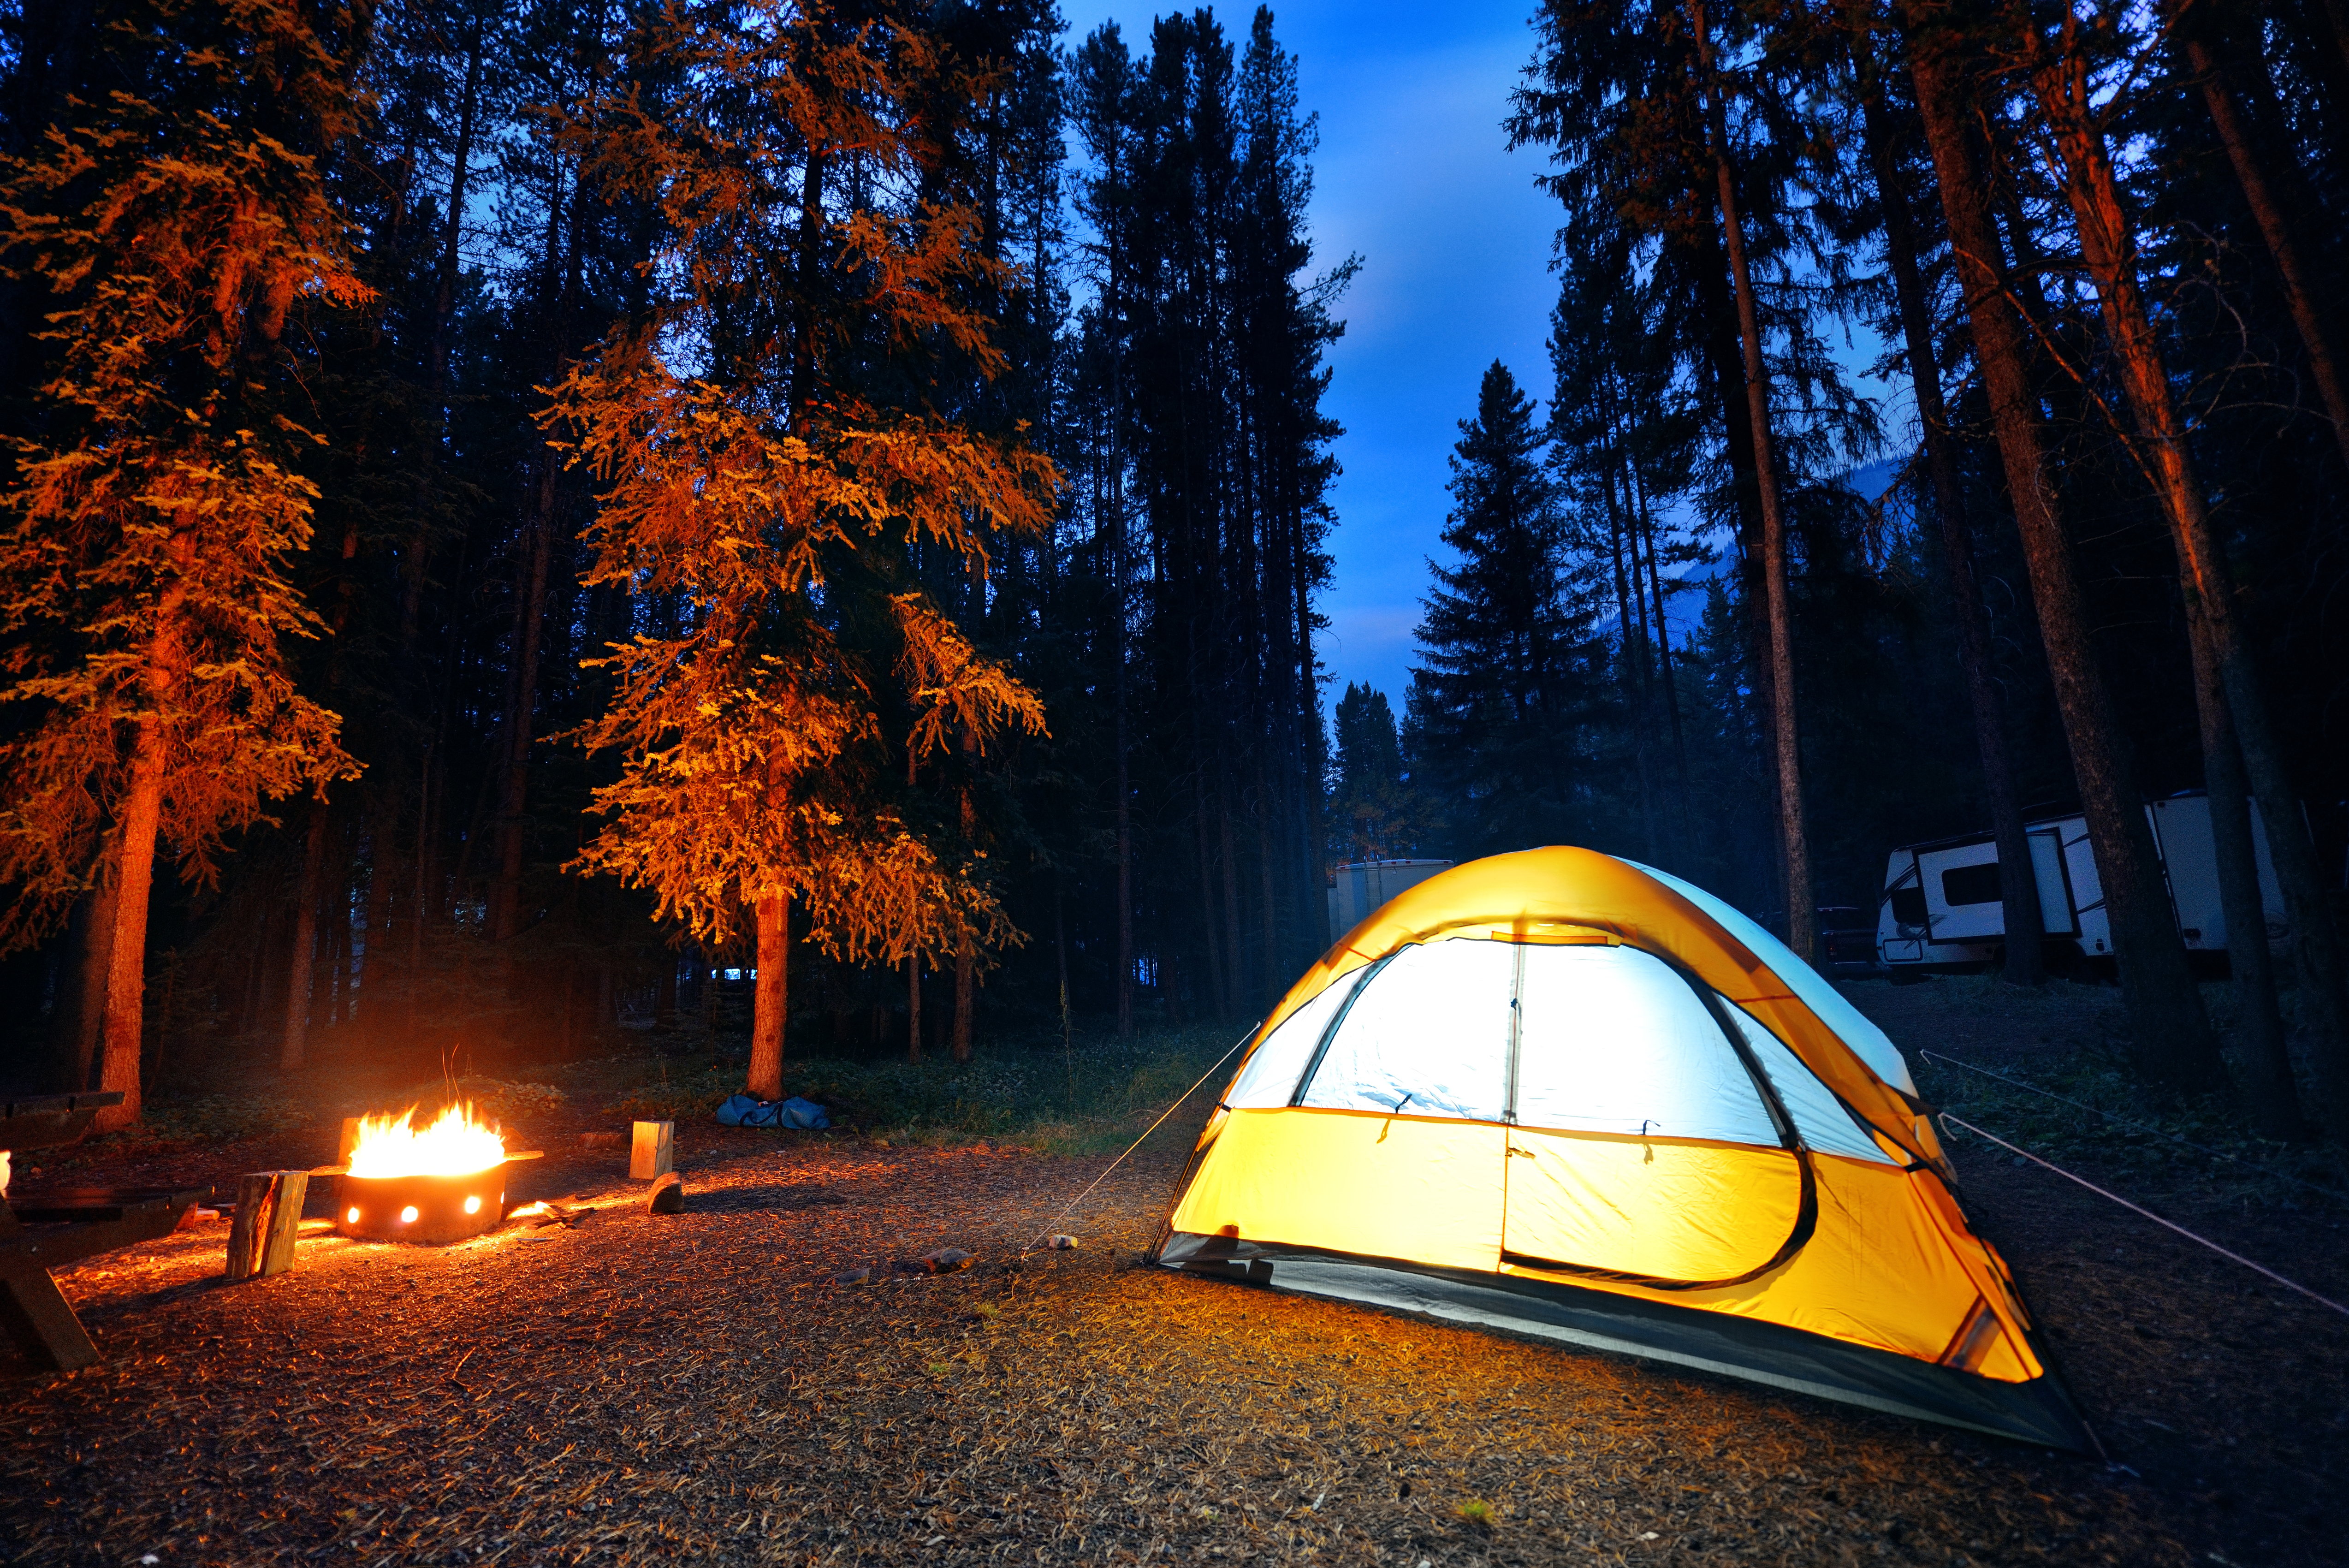 Camping in forest with tent light and bonfire in Banff National Park